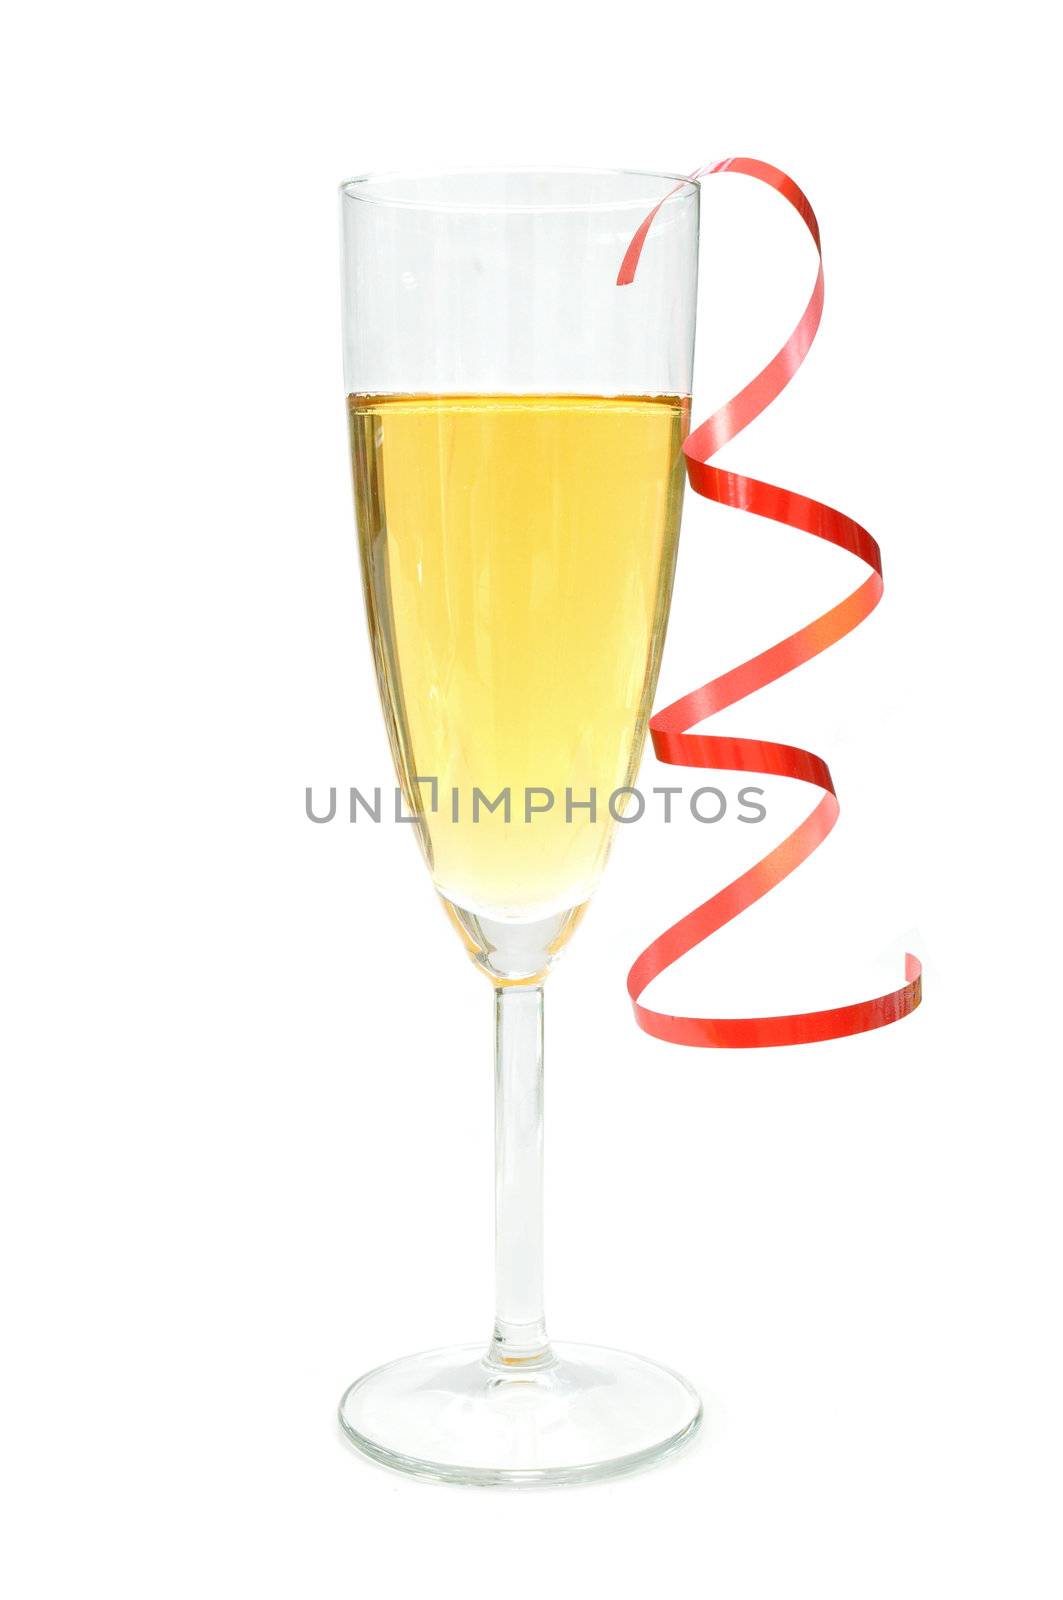 Champagne glass with decorative red ribbon 